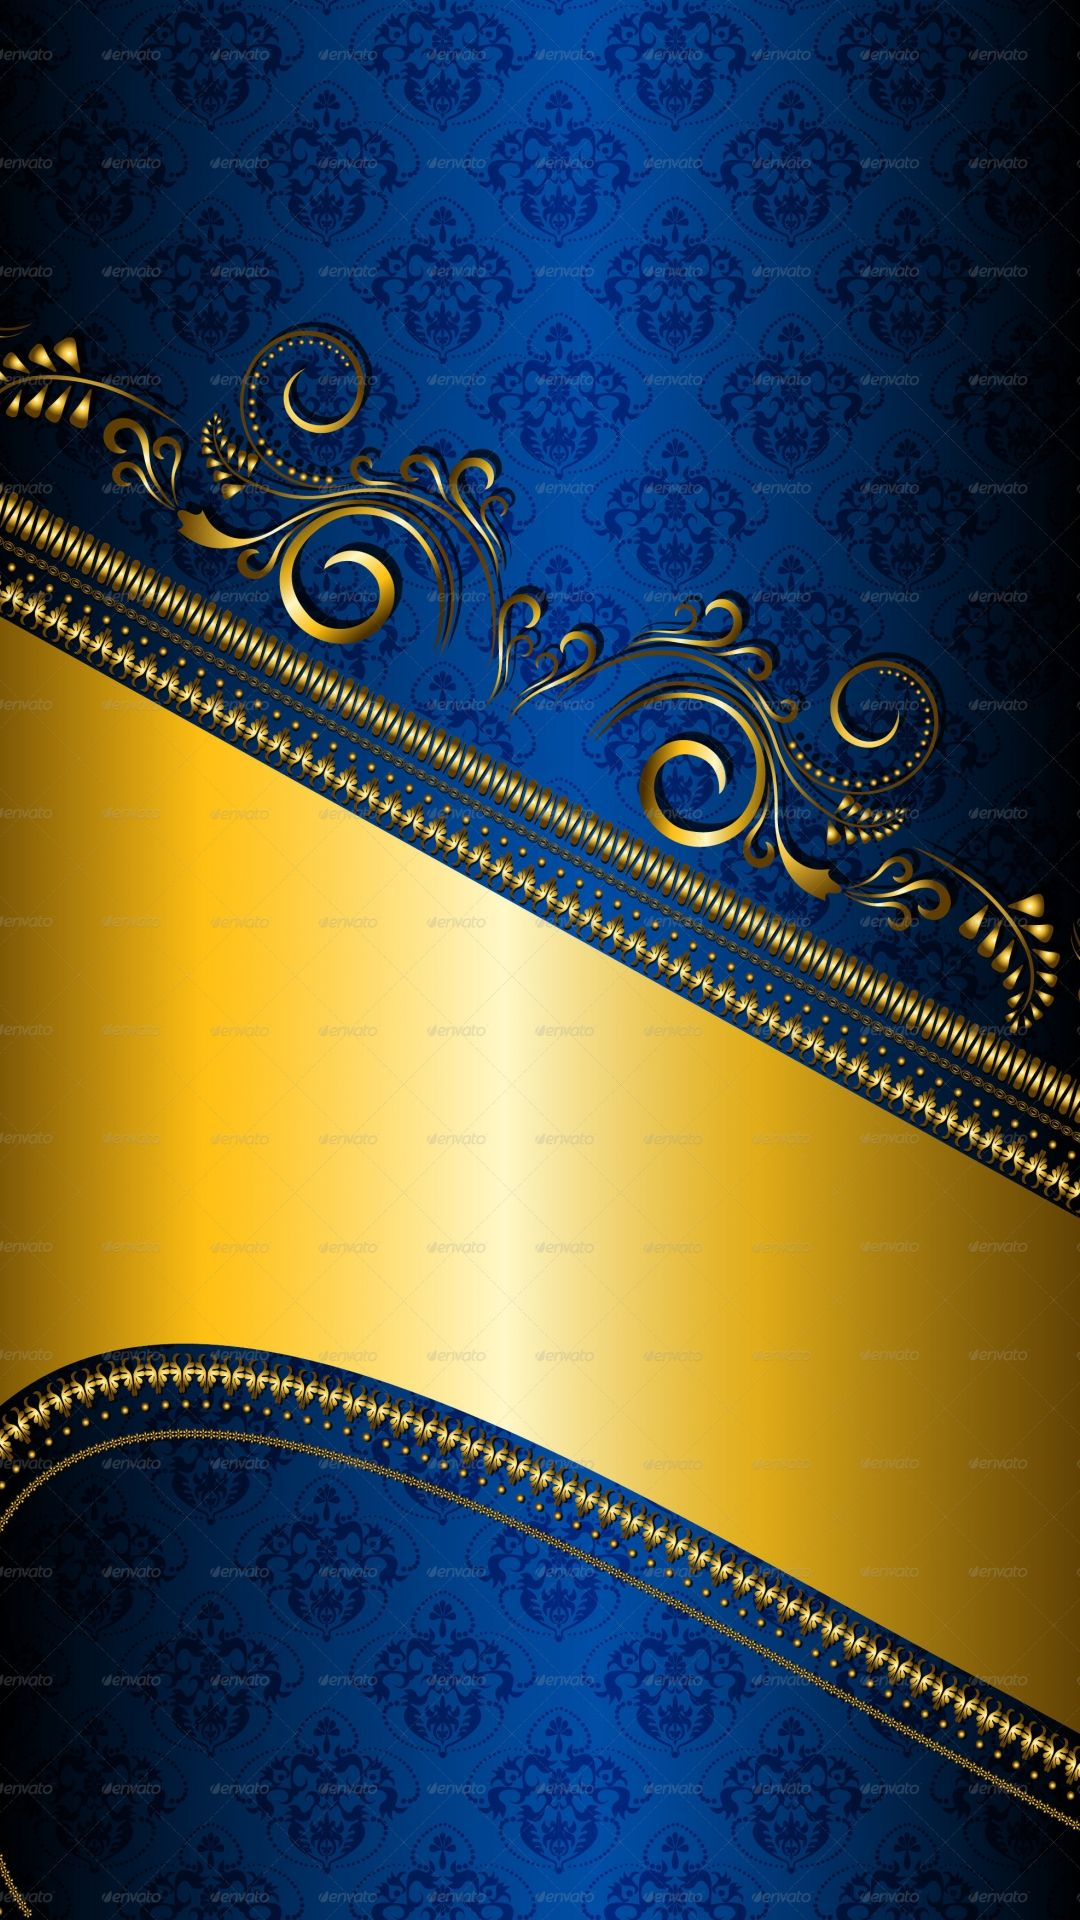 1080x1920 Blue and Gold Abstract Wallpapers Top Free Blue and Gold Abstract Backgrounds